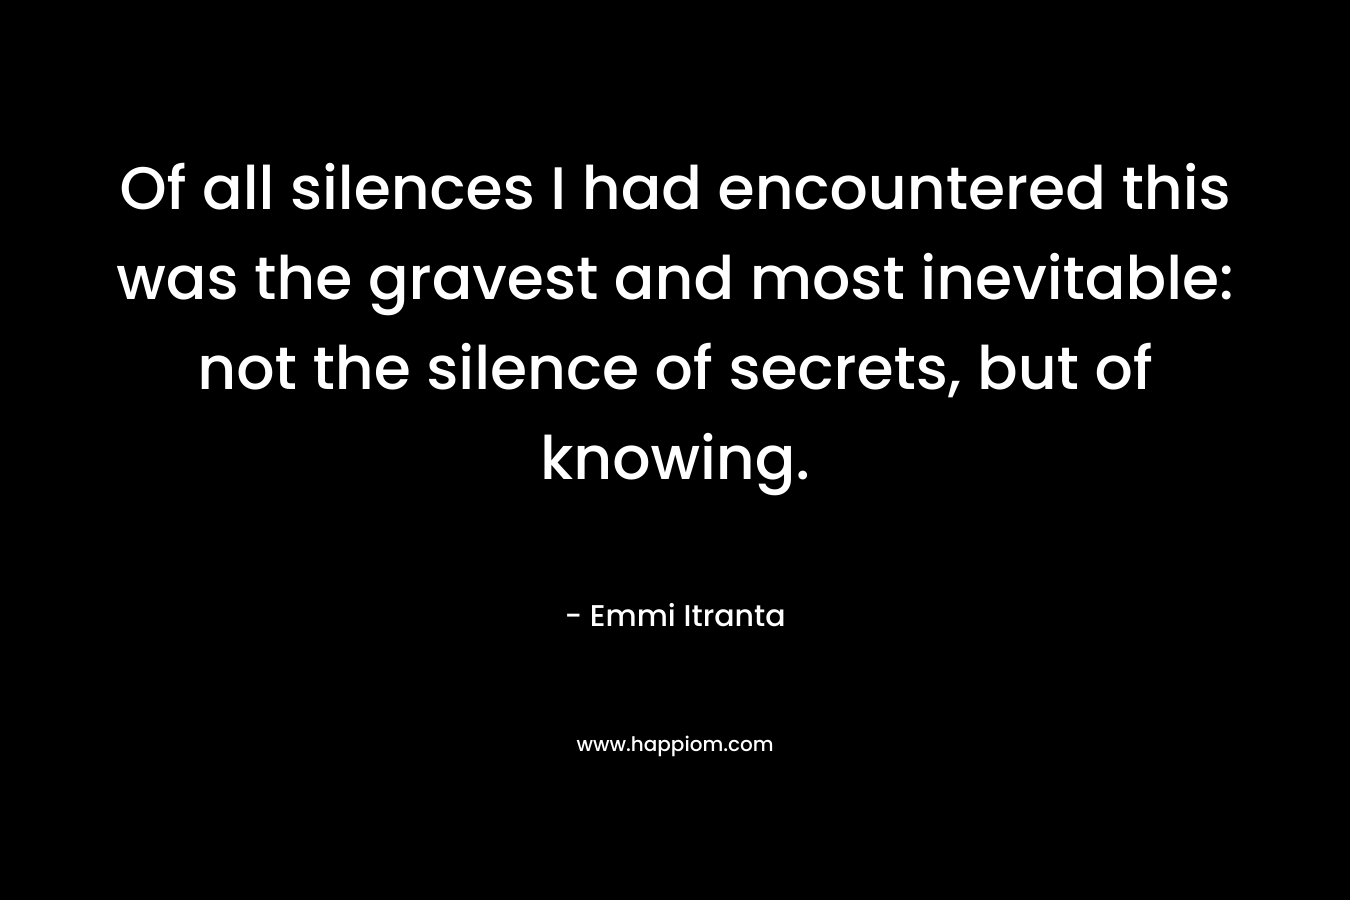 Of all silences I had encountered this was the gravest and most inevitable: not the silence of secrets, but of knowing.